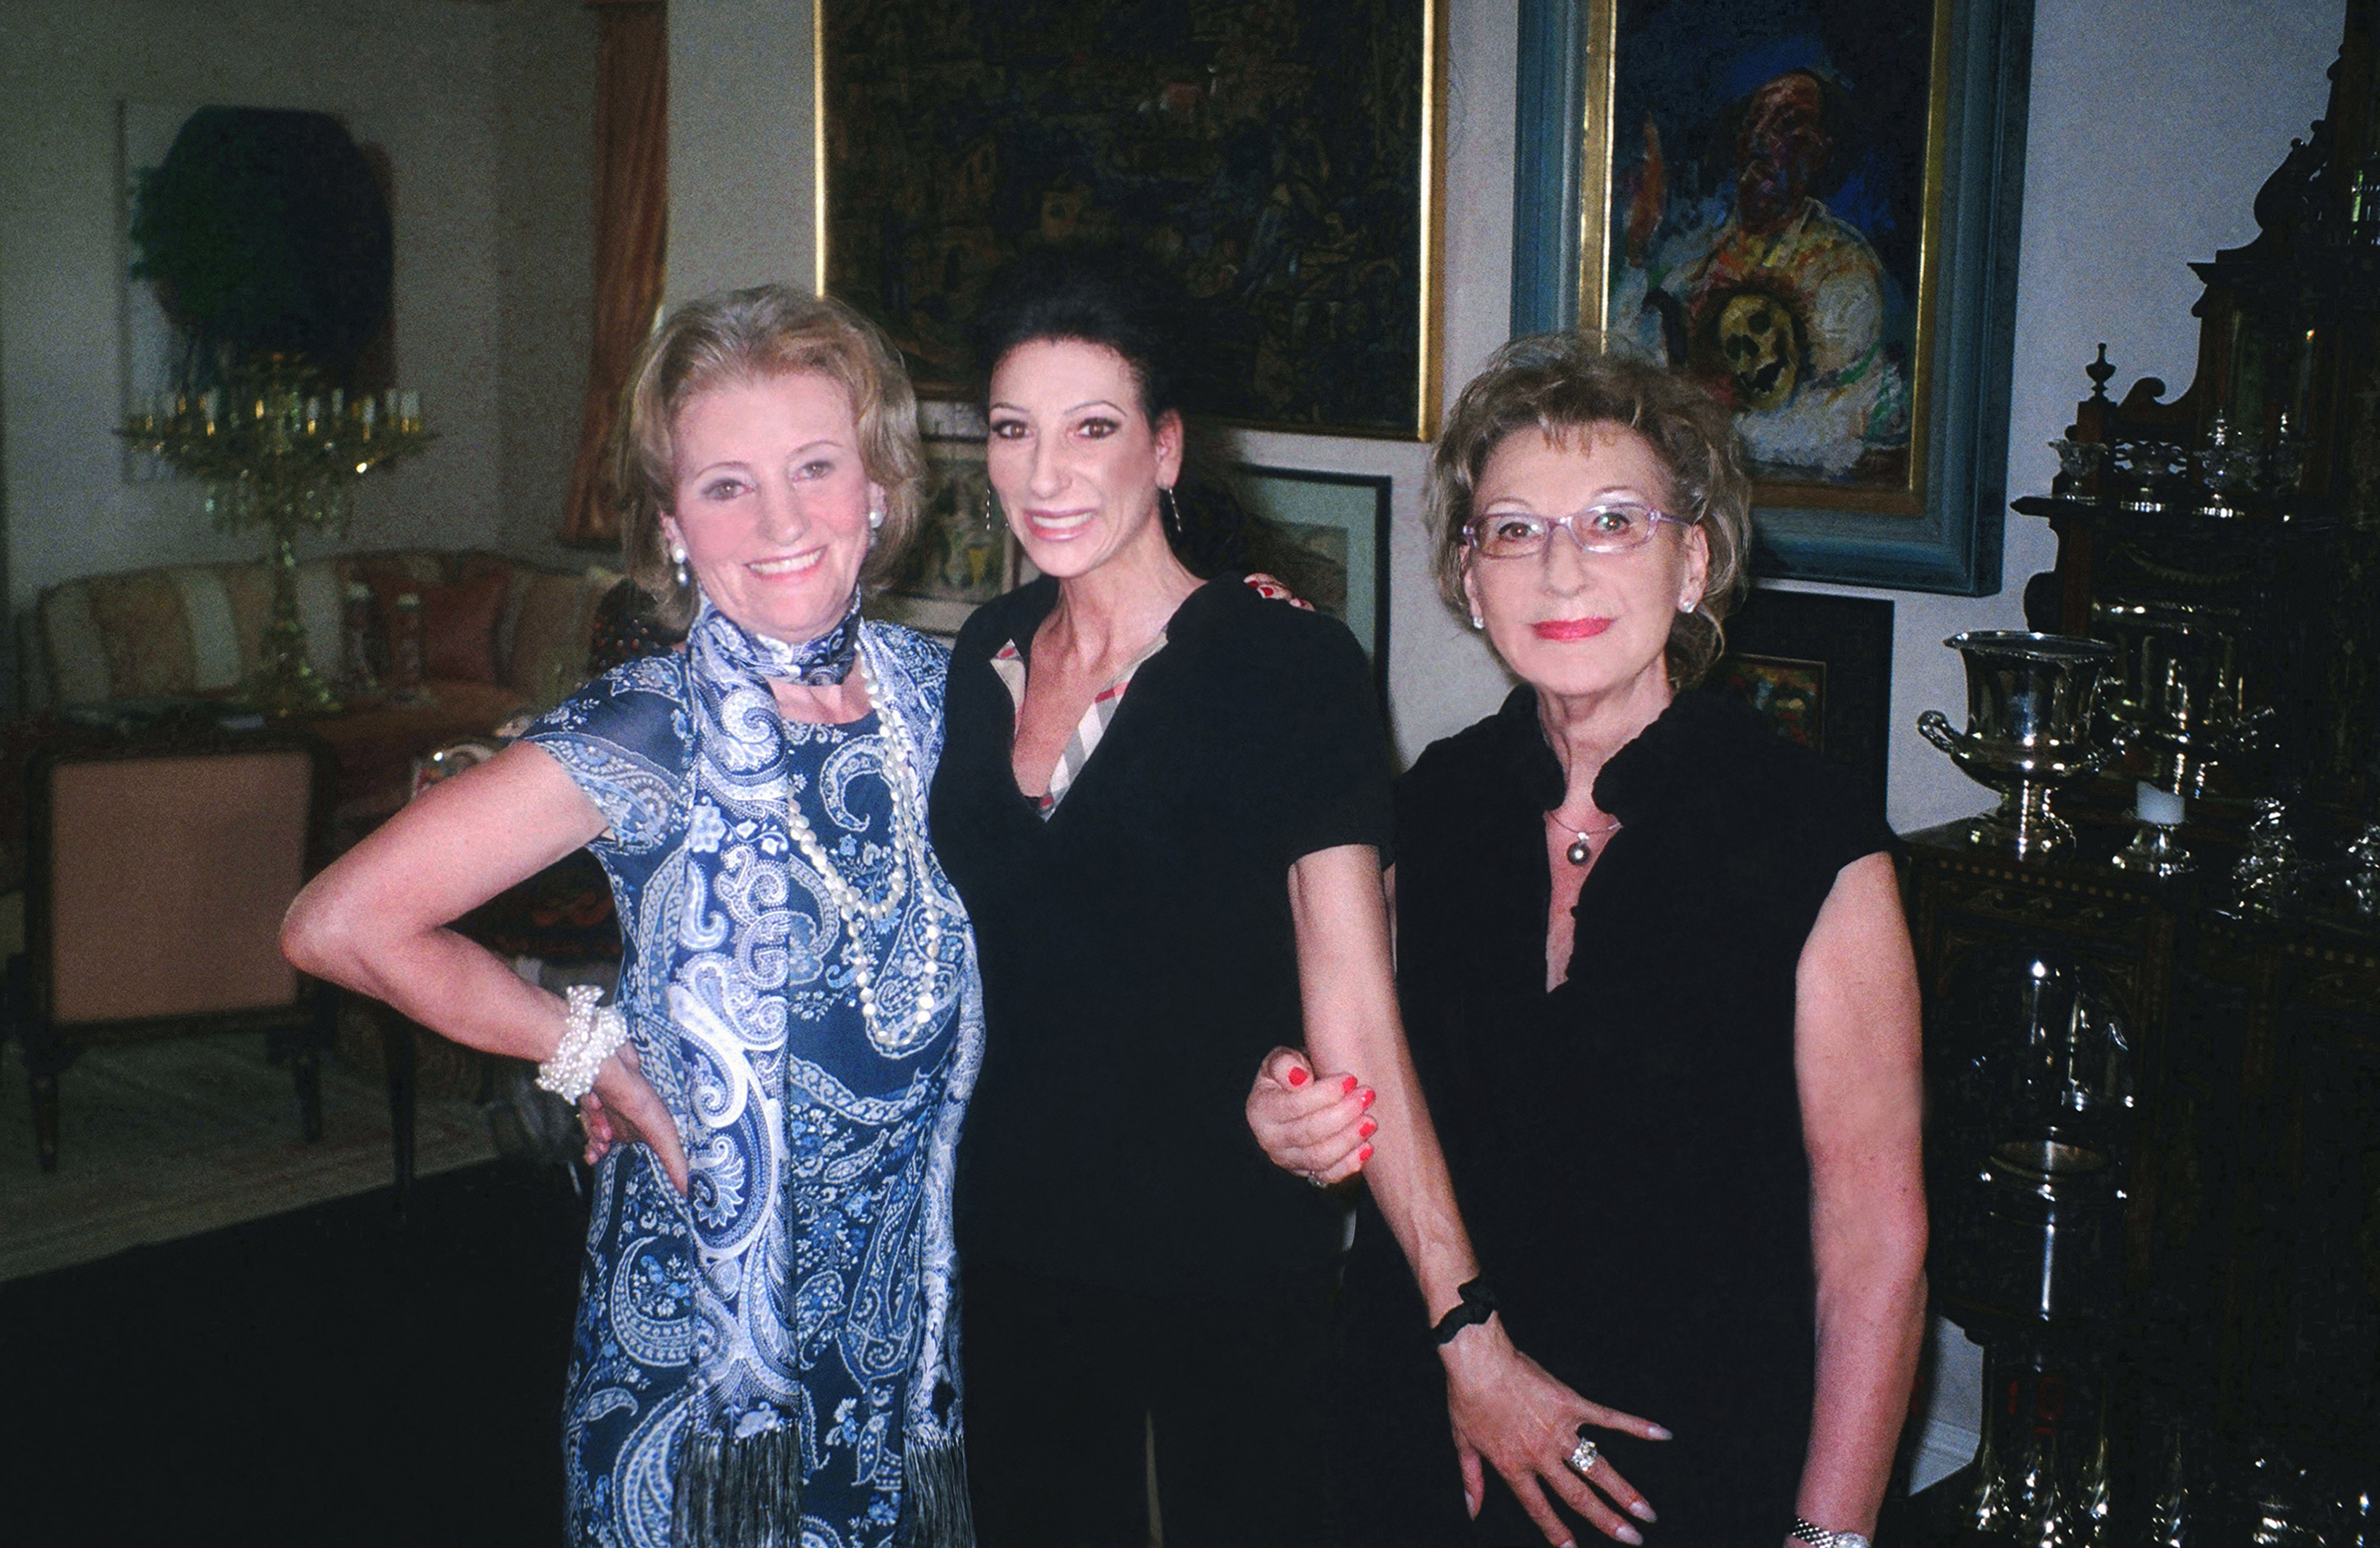 Lucia Aliberti with the Austrian businesswoman Elisabeth Guertler and Doris Papst⚘Great Friends⚘Vienna⚘Privat Party⚘:http://www.luciaaliberti.it #luciaaliberti #elisabethguertler #dorispapst #vienna #party #friends